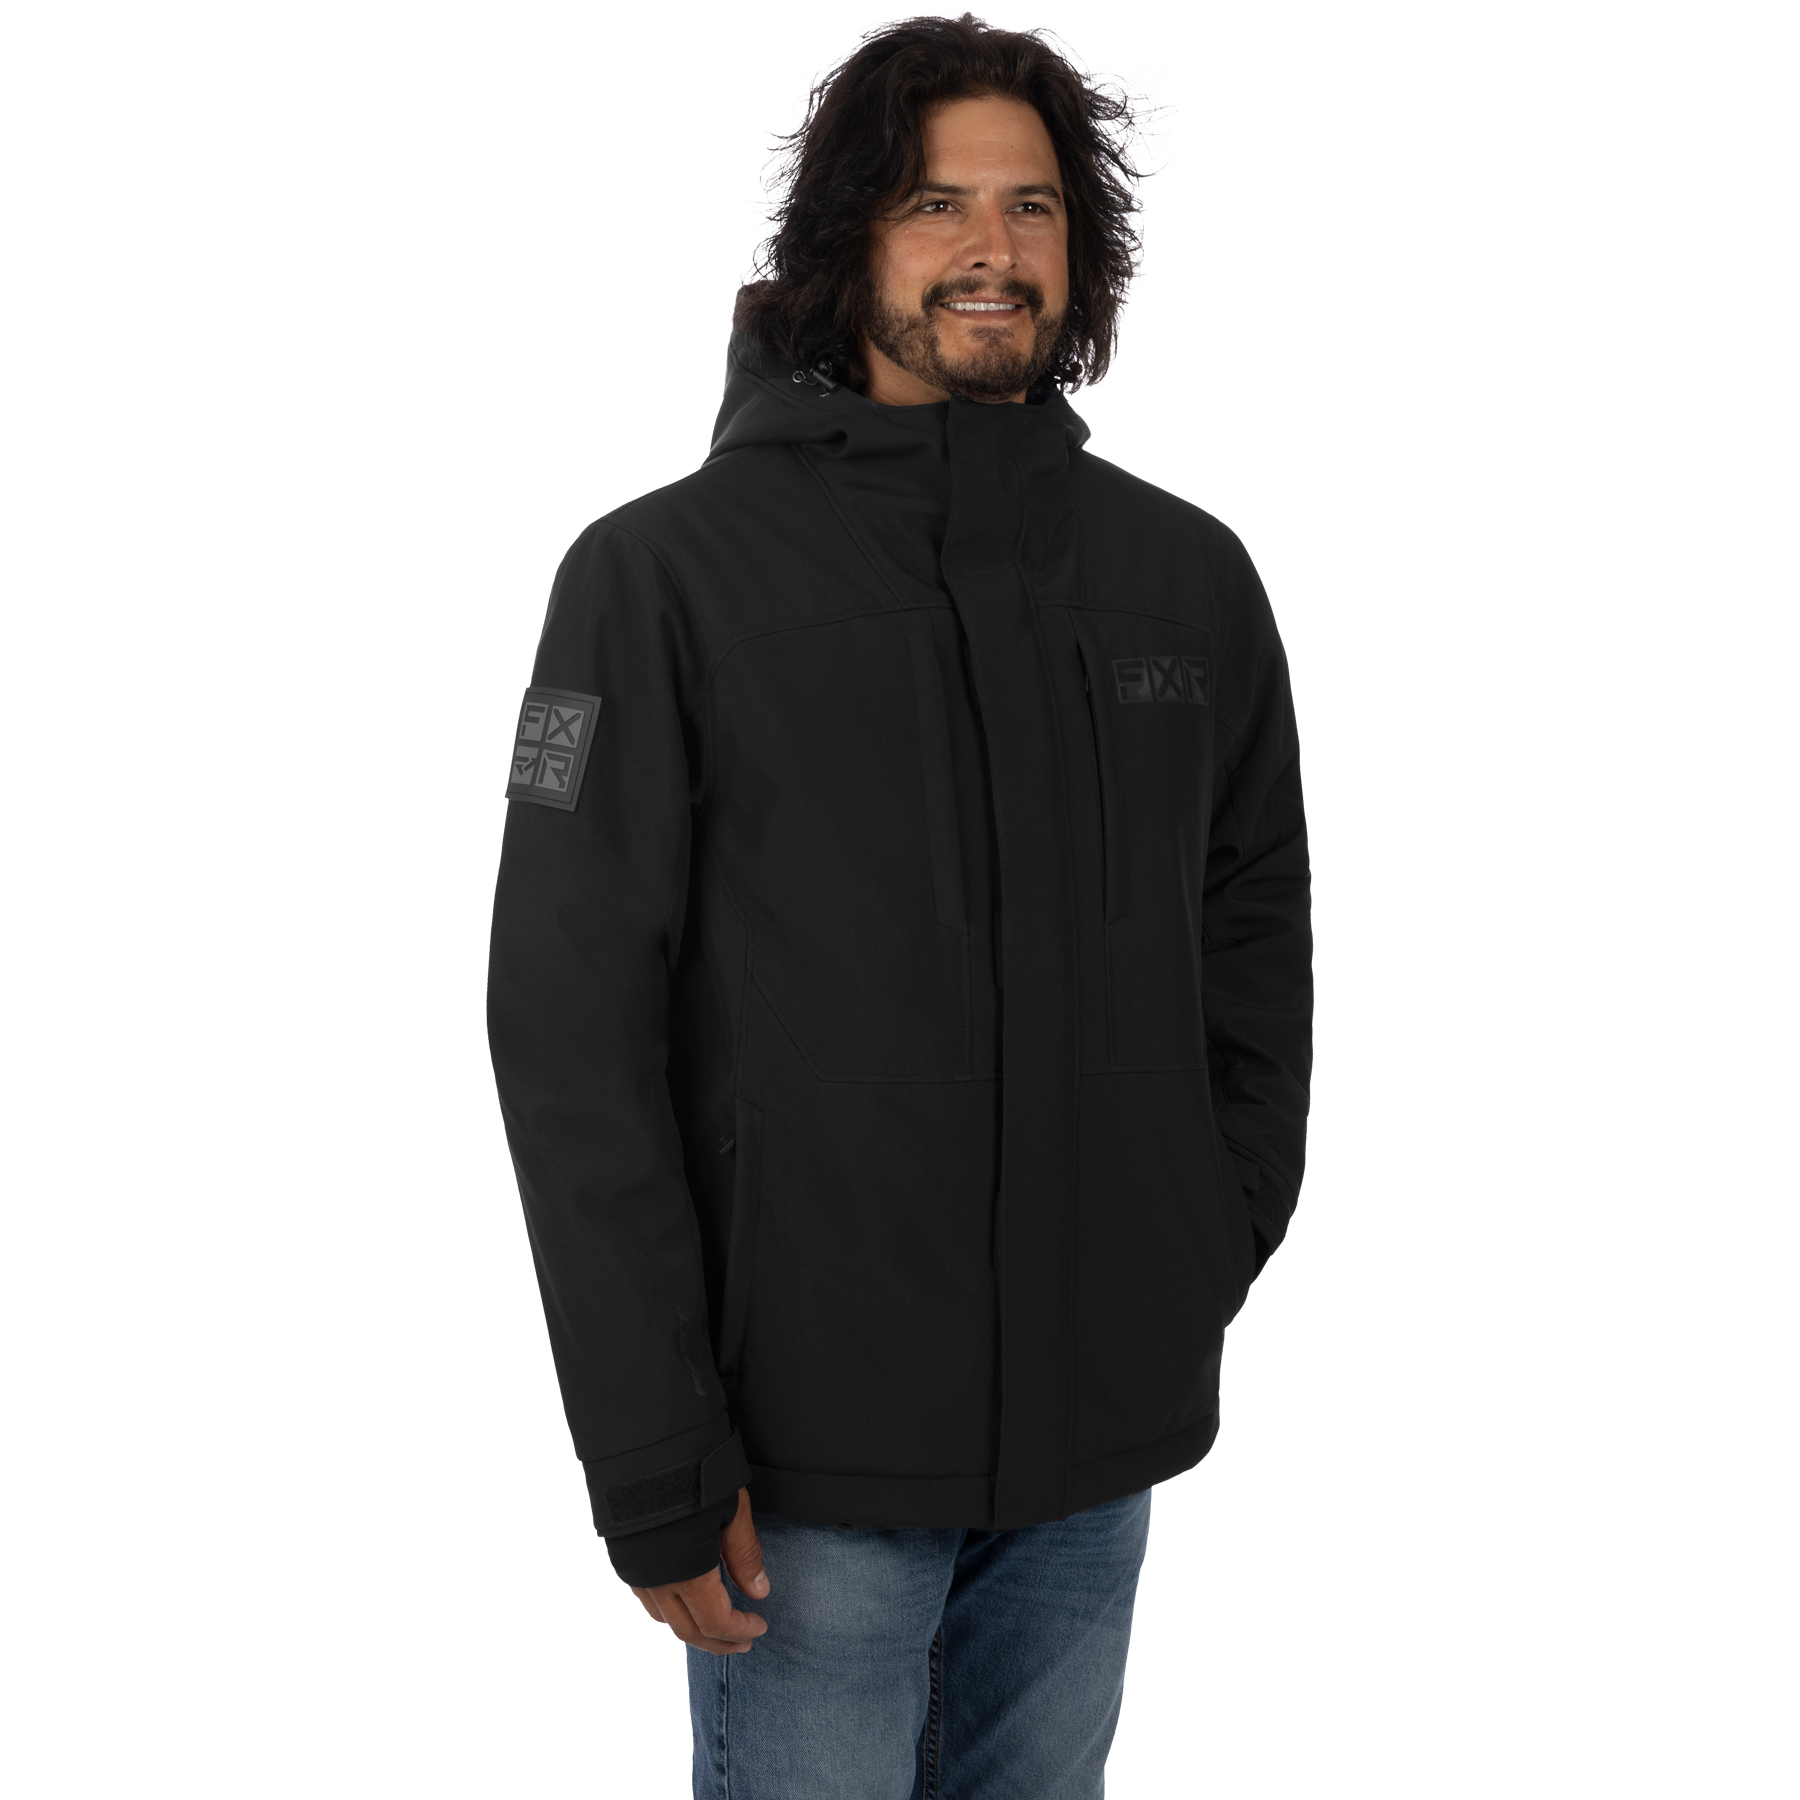   vertical pro insulated softshell  black